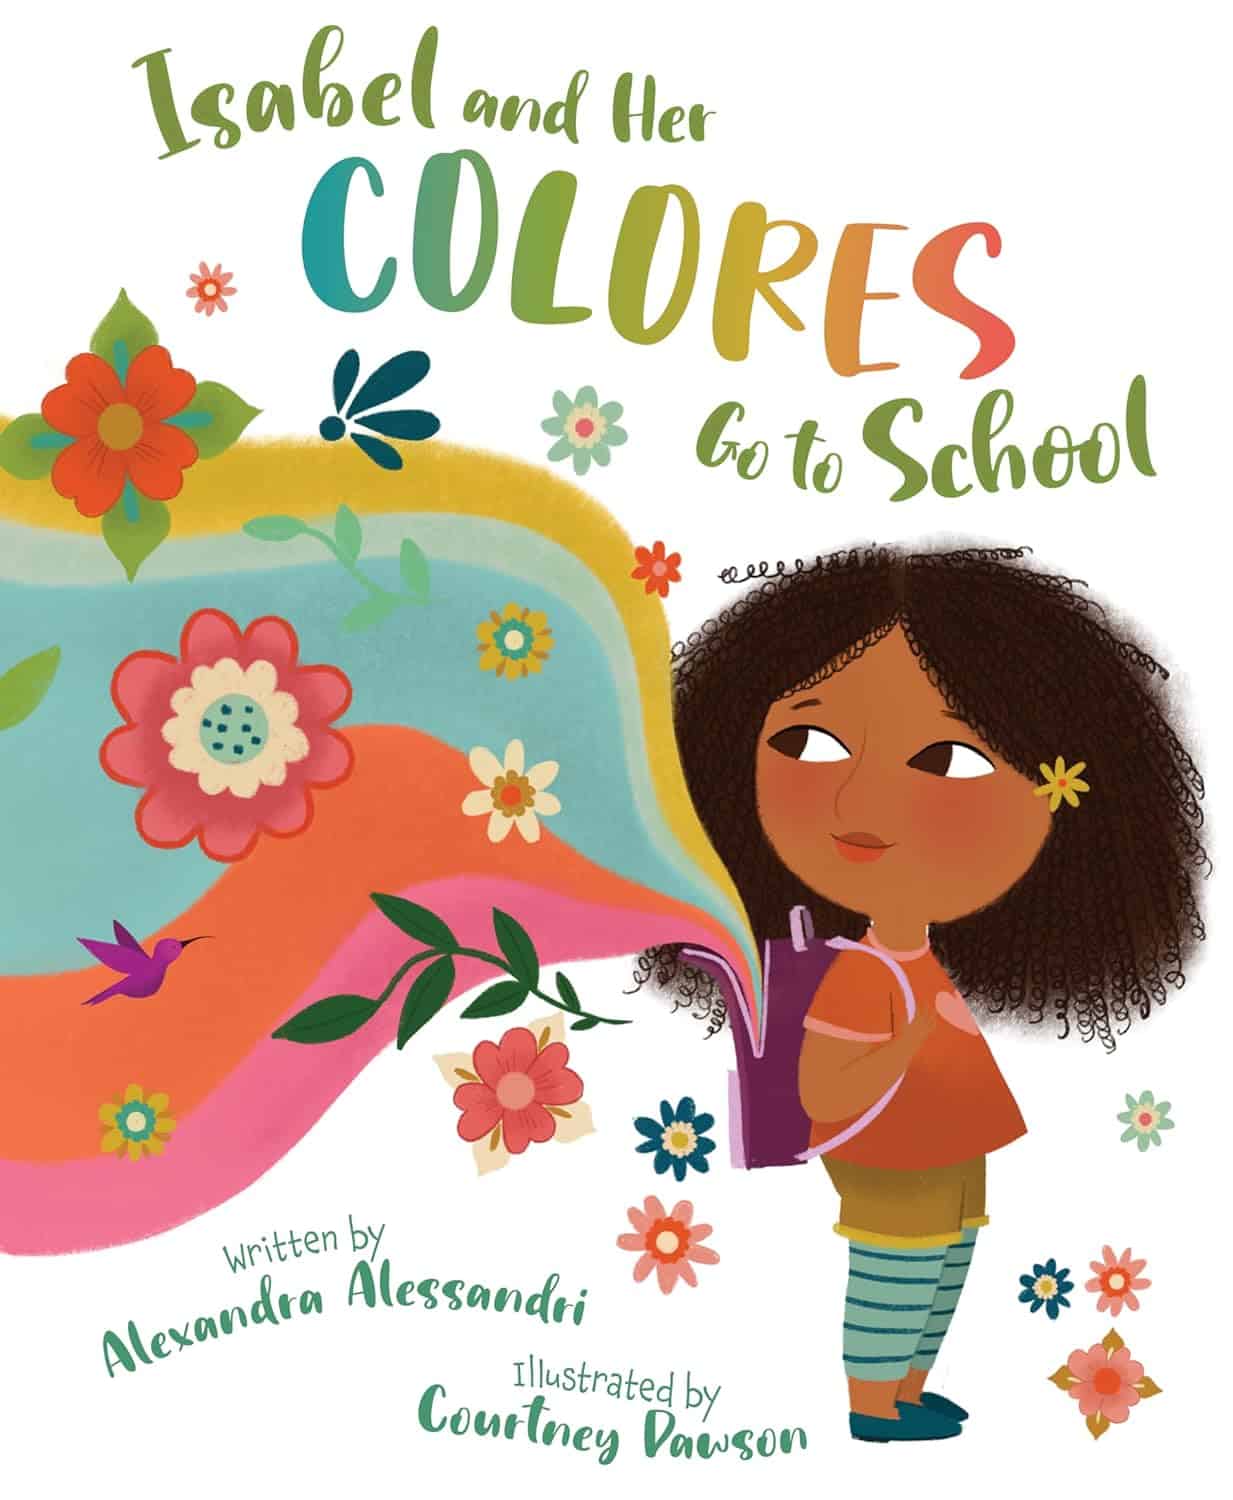 Isabel and Her Colores Go to School (English and Spanish Edition) by Alexandra Alessandri